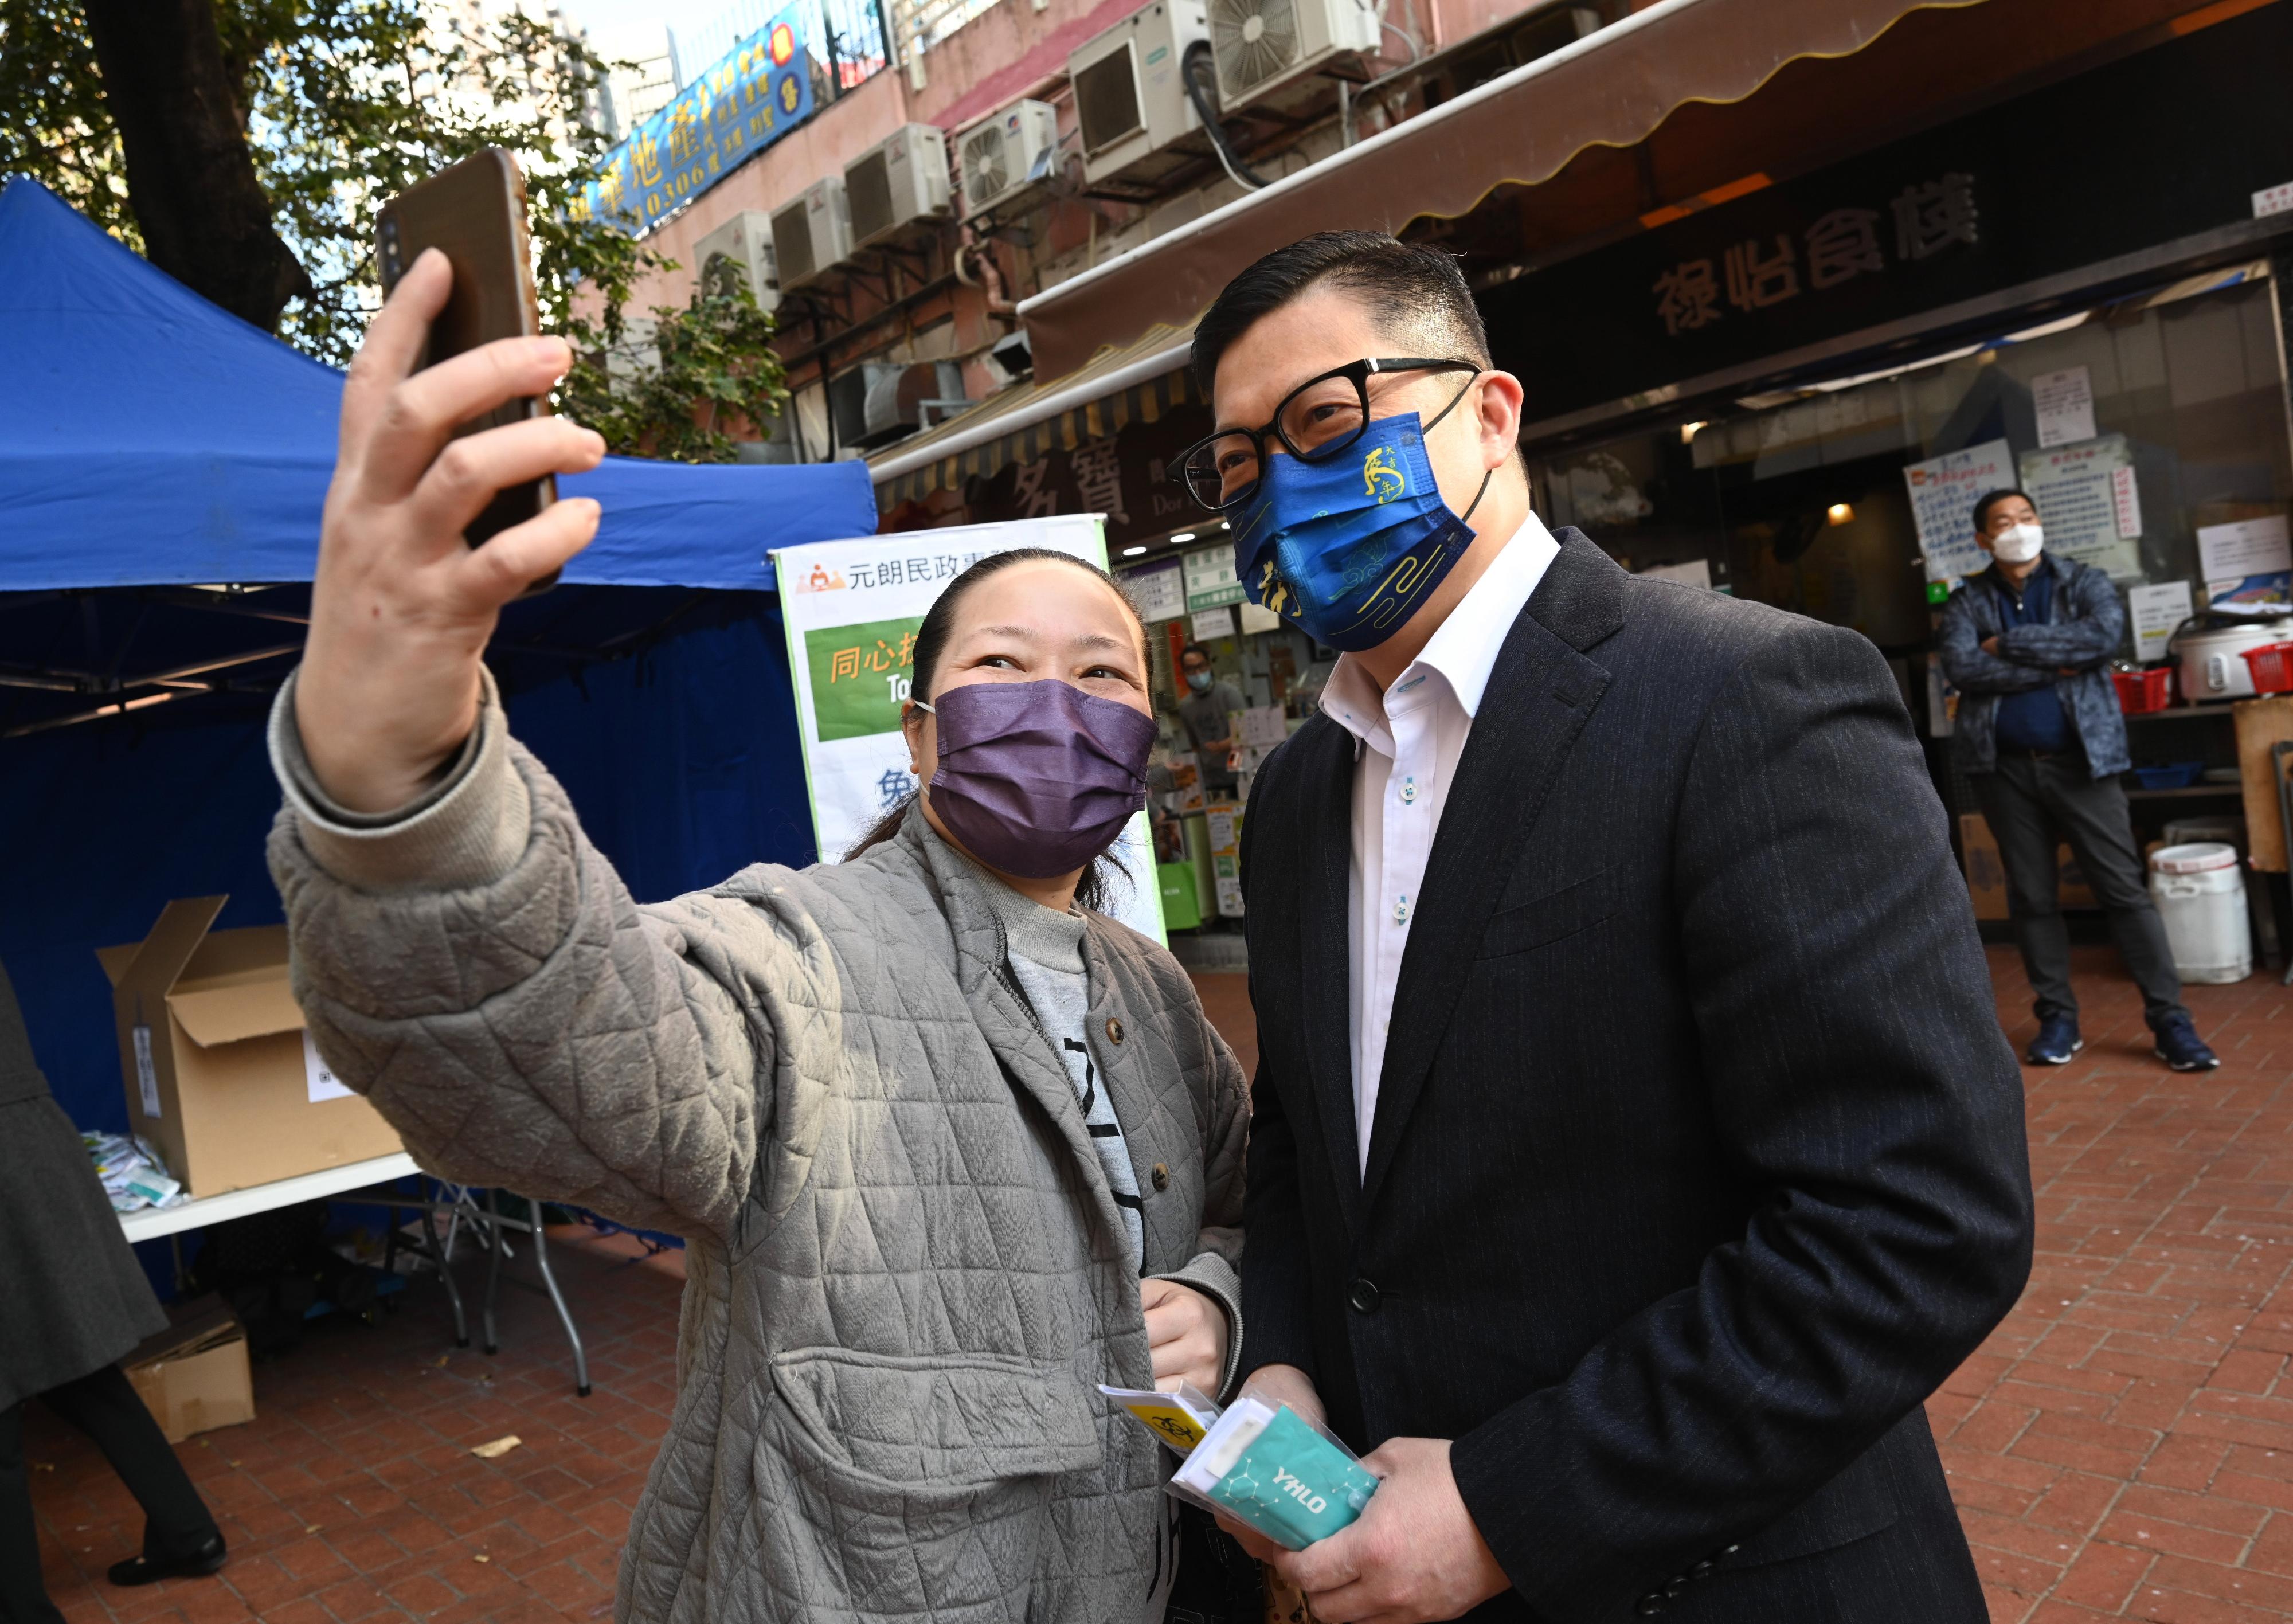 The Secretary for Security, Mr Tang Ping-keung (first right), distributed COVID-19 rapid test kits at On Tat Square in Yuen Long today (February 4) and called on residents to undergo voluntary testing and help fight the virus together. Photo shows Mr Tang joining a photo with a resident who received a COVID-19 rapid test kit.